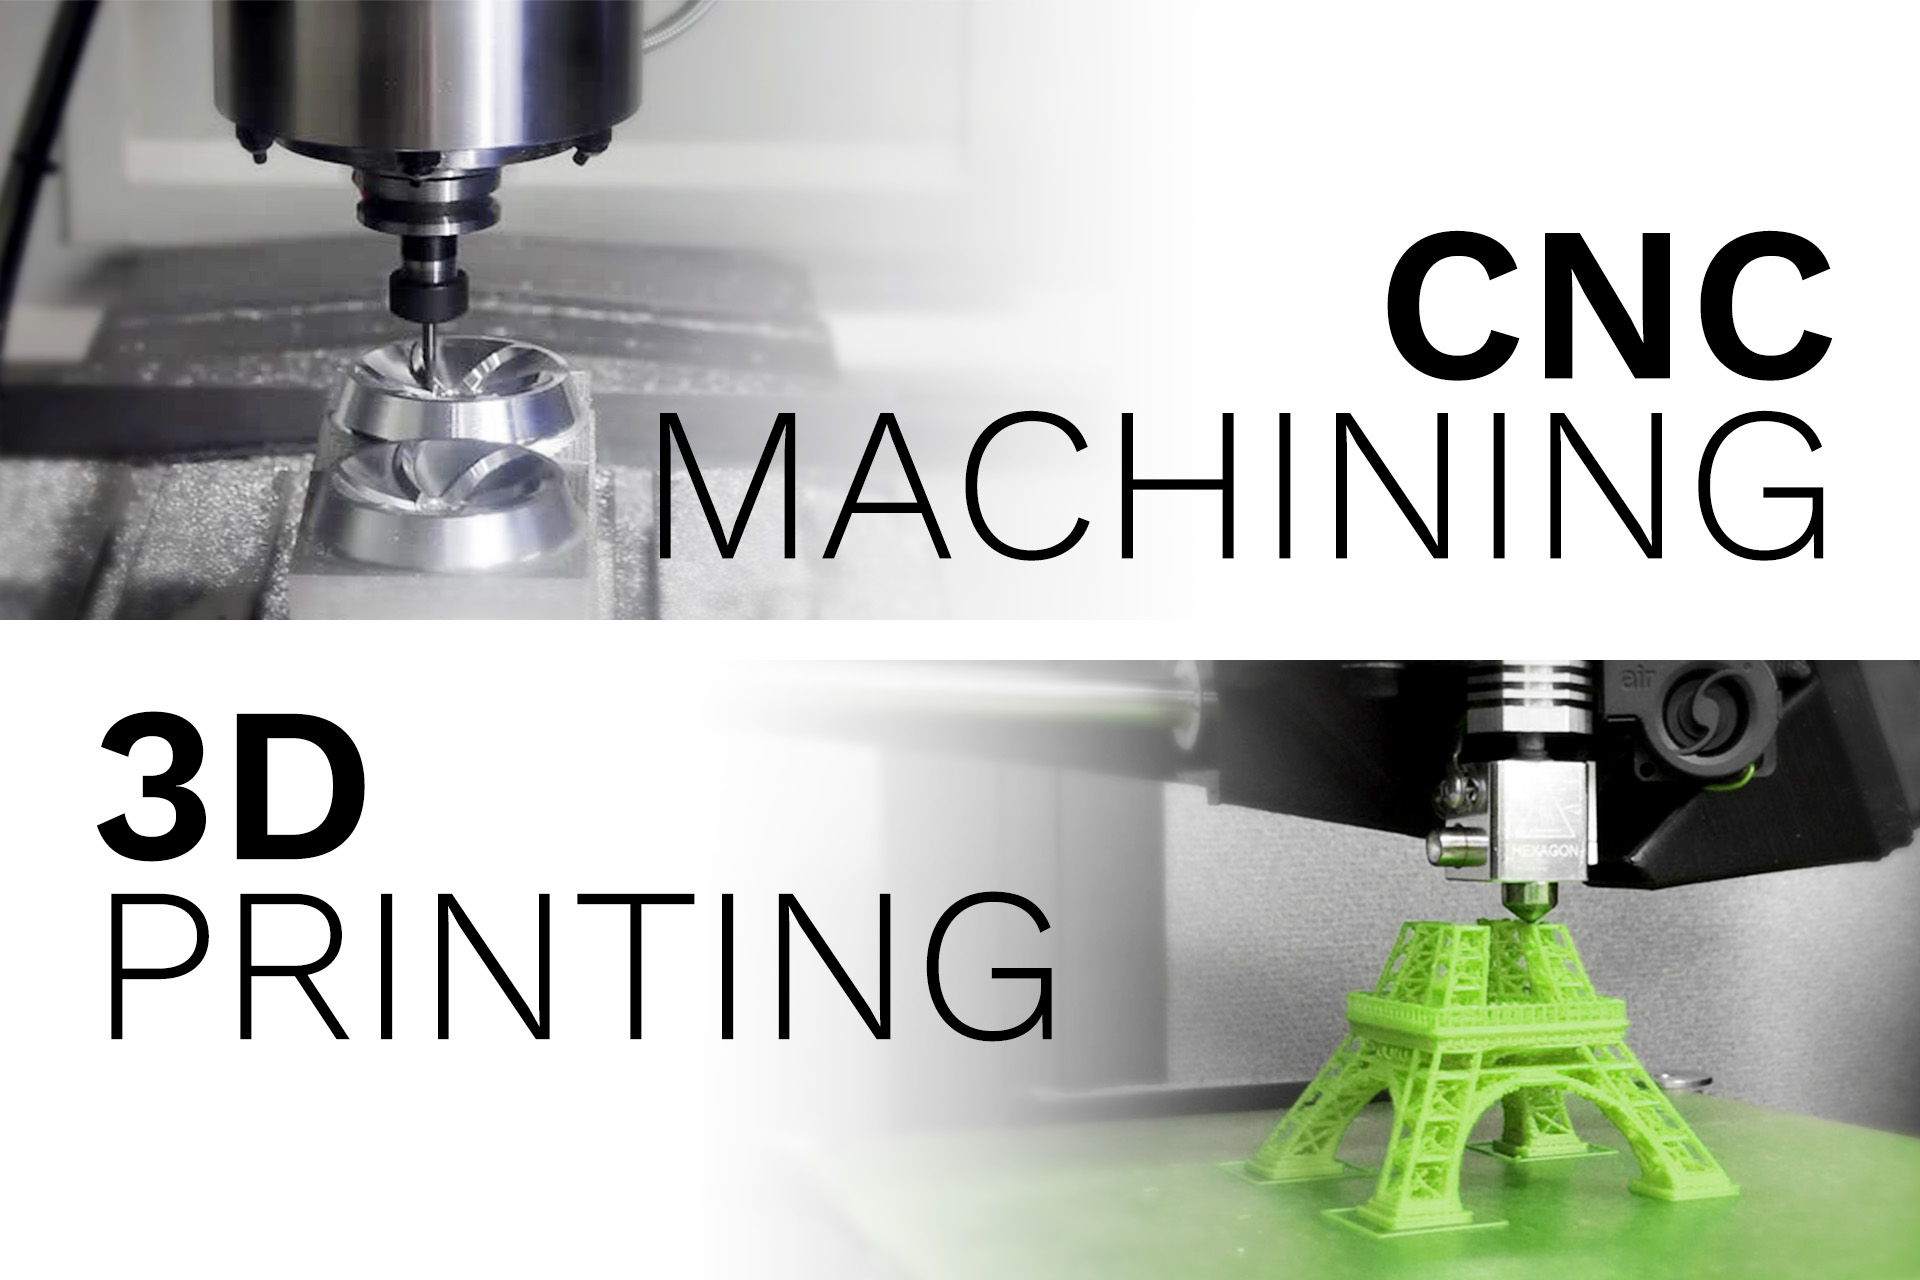 What advantages you will get from rapid prototype CNC machining?